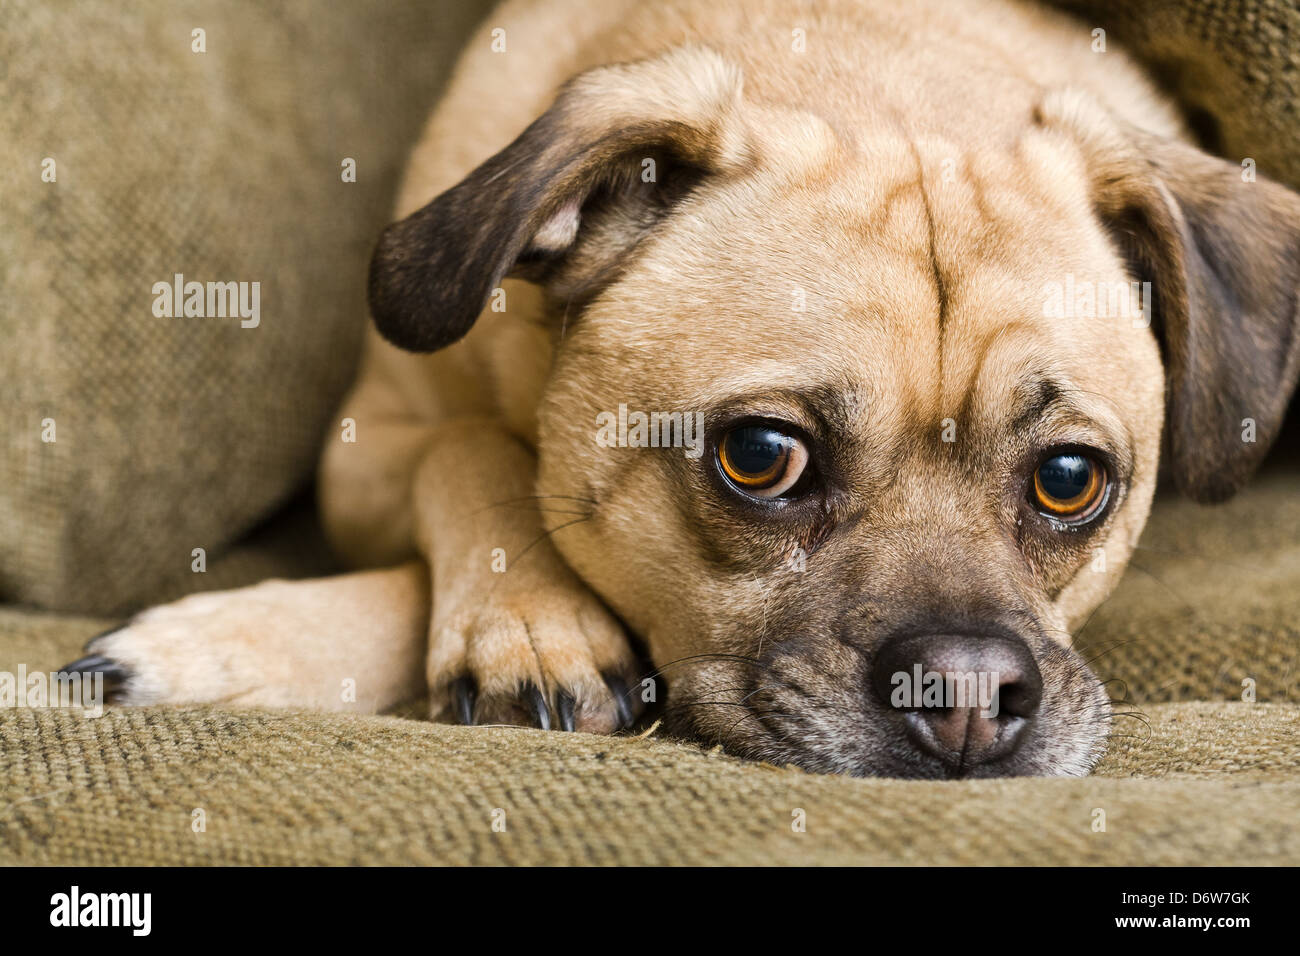 Dog resting at home. Stock Photo